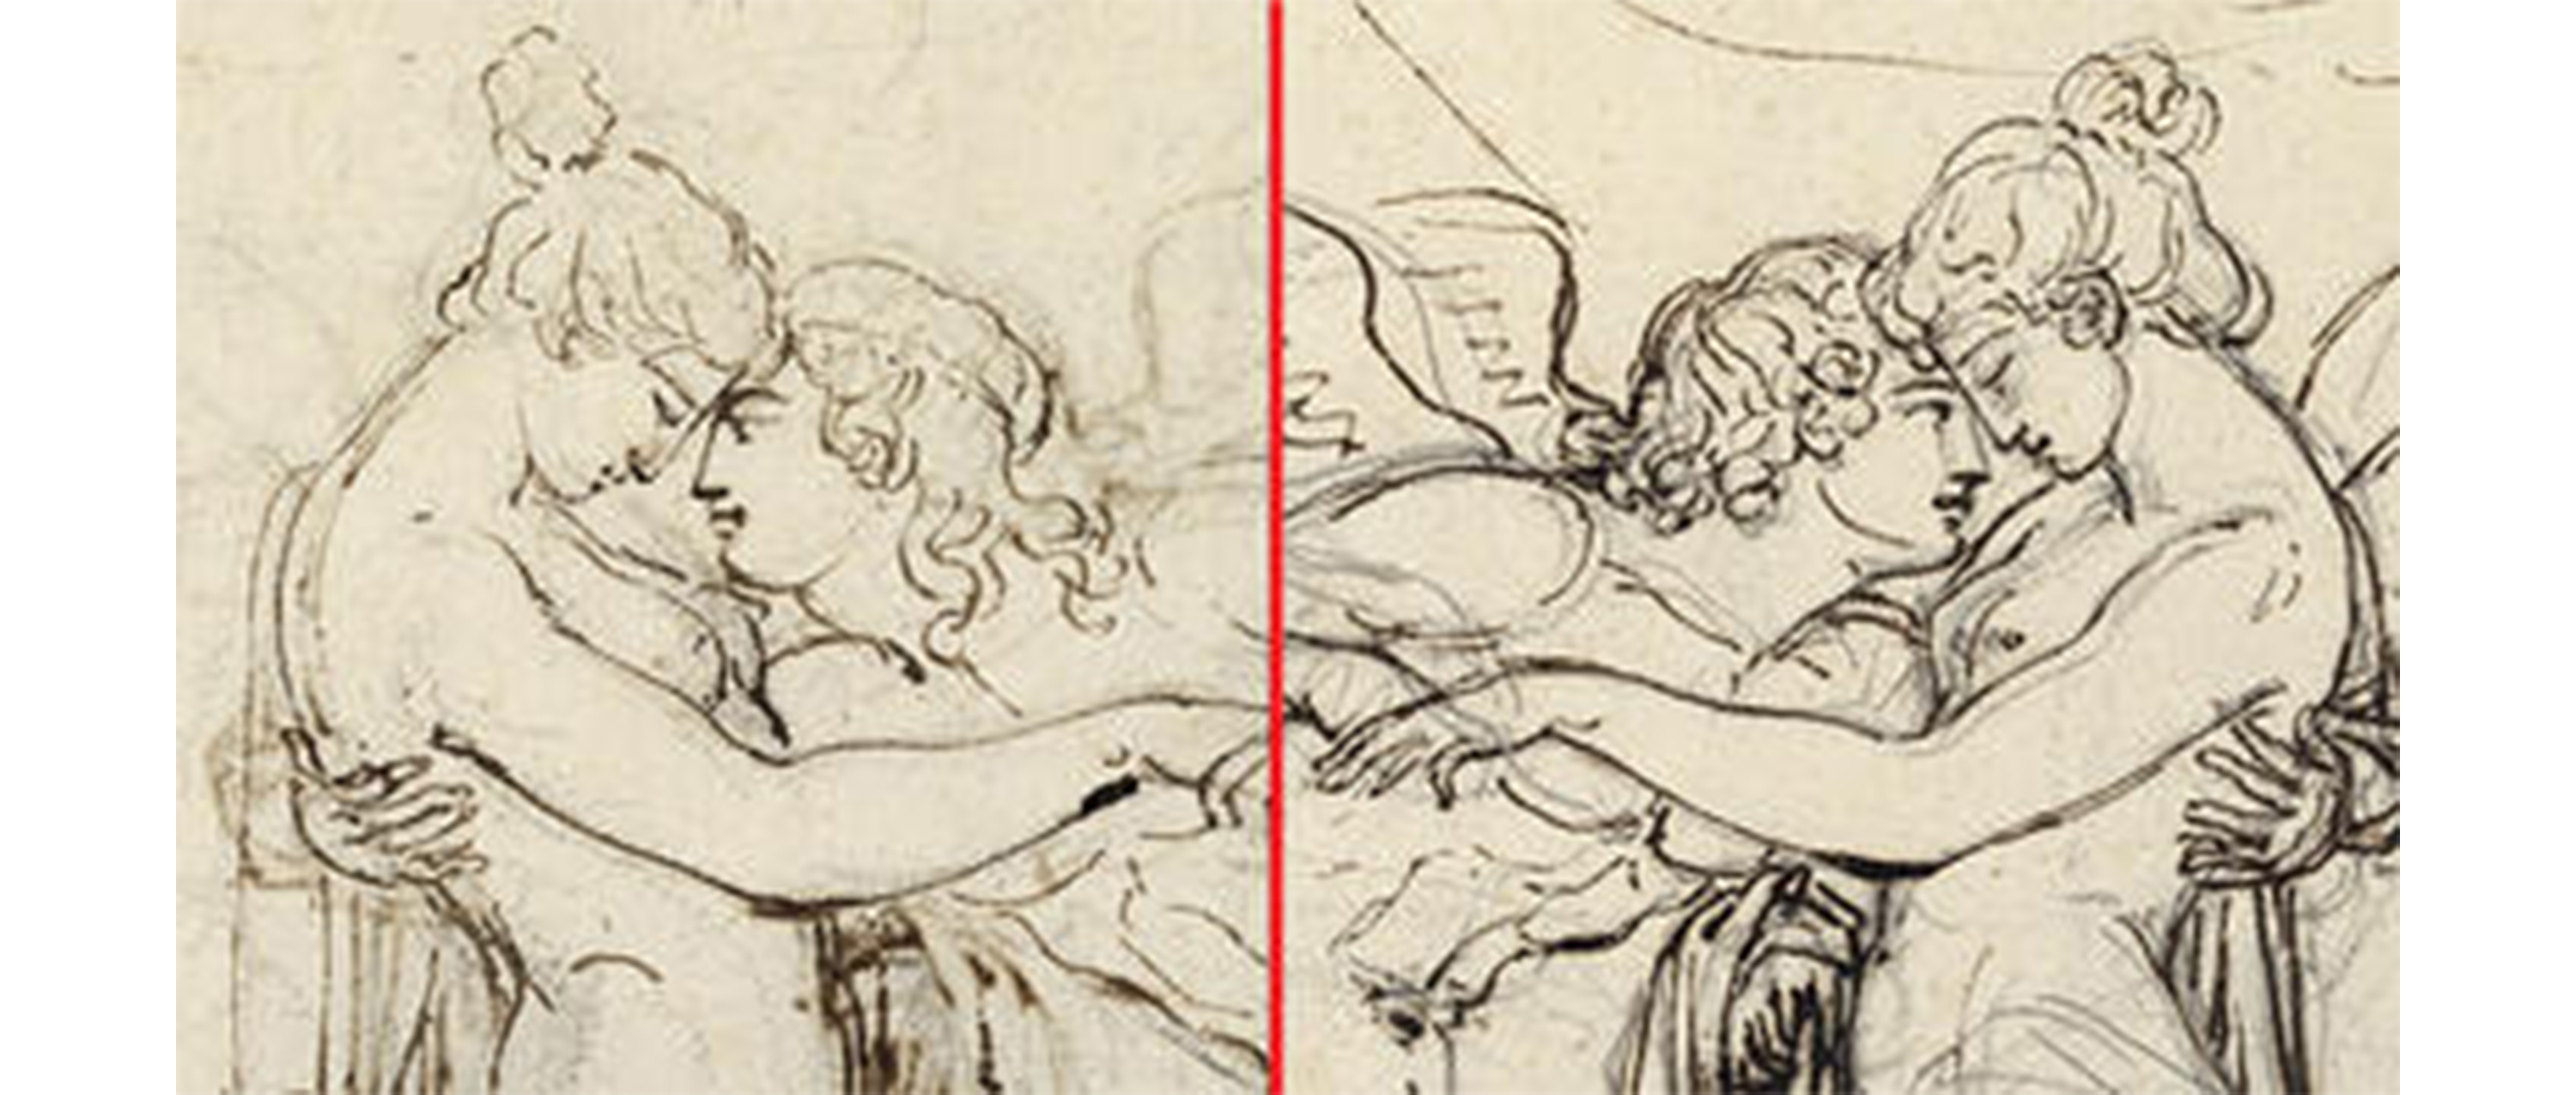 two images side by side. both show partially nude man and woman in a close embrace. left image has woman on left and man on right. right image has man on left and woman on right.